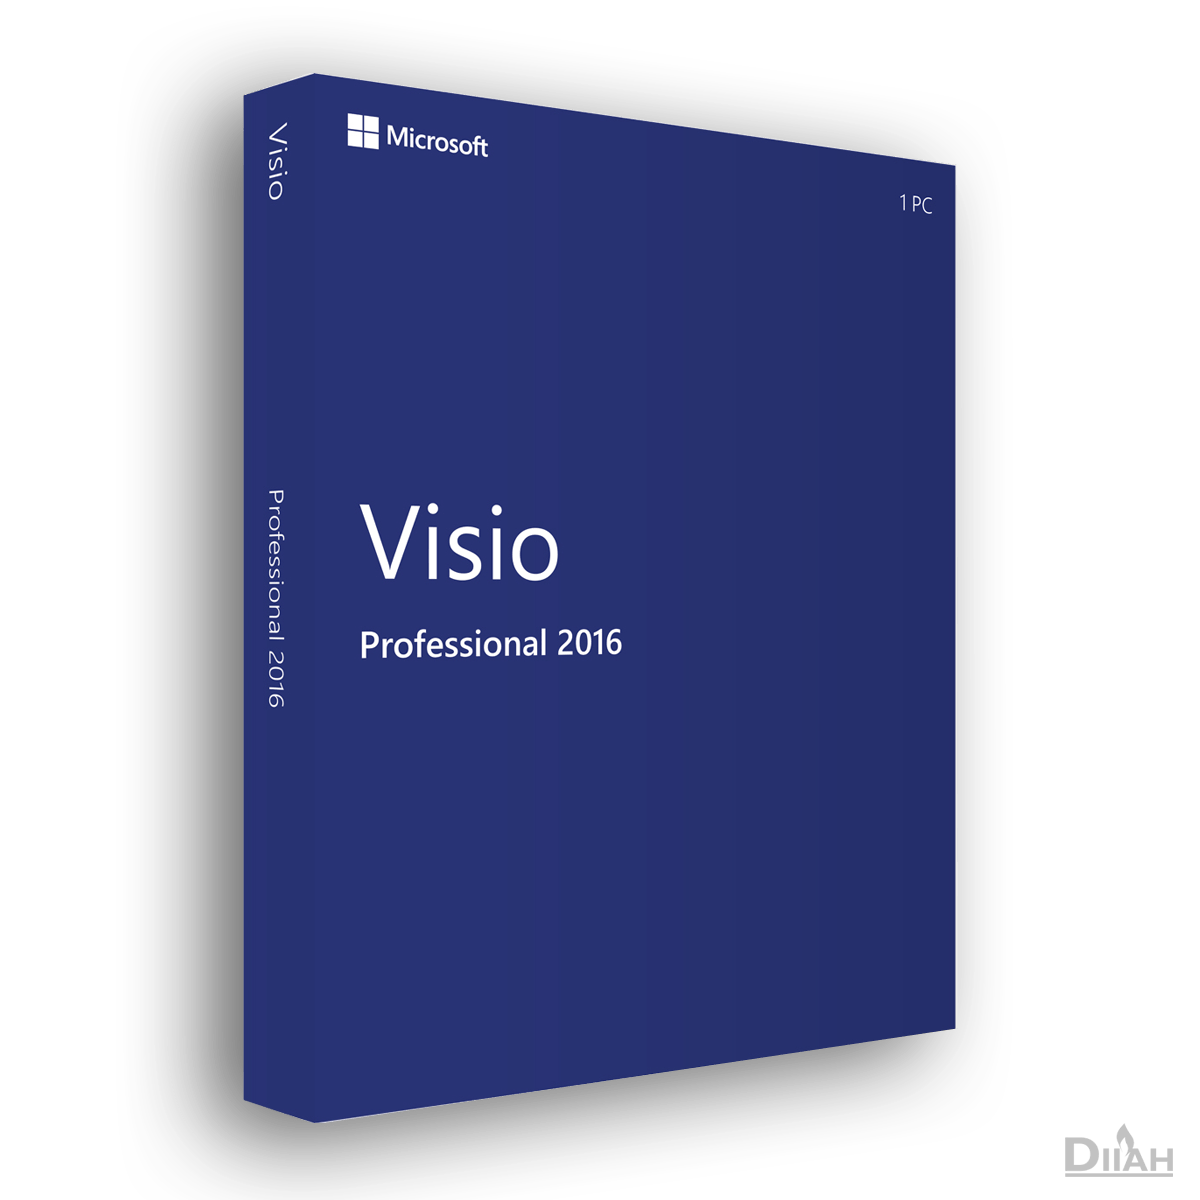 Buy Now Microsoft Visio Professional 16 Diiah Online Store